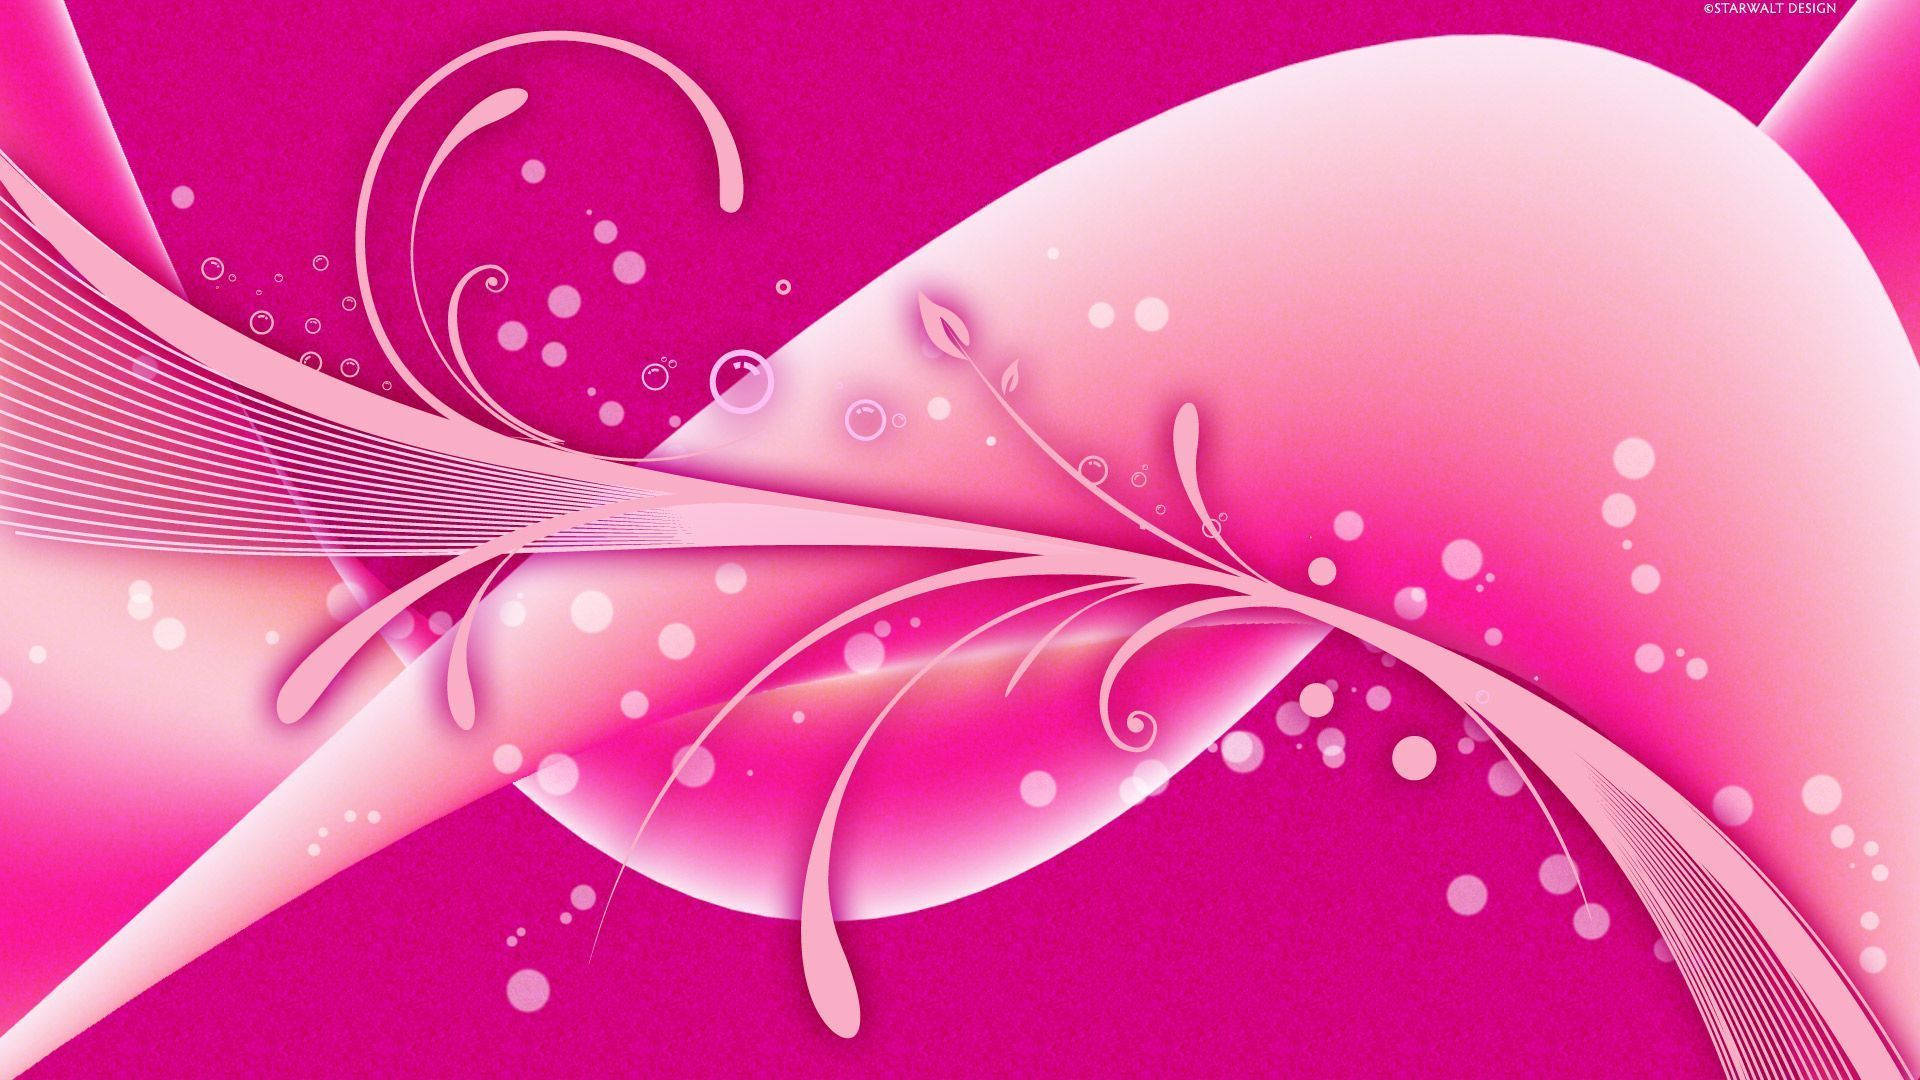 Free Pink Color Wallpaper Downloads, [100+] Pink Color Wallpapers for FREE  